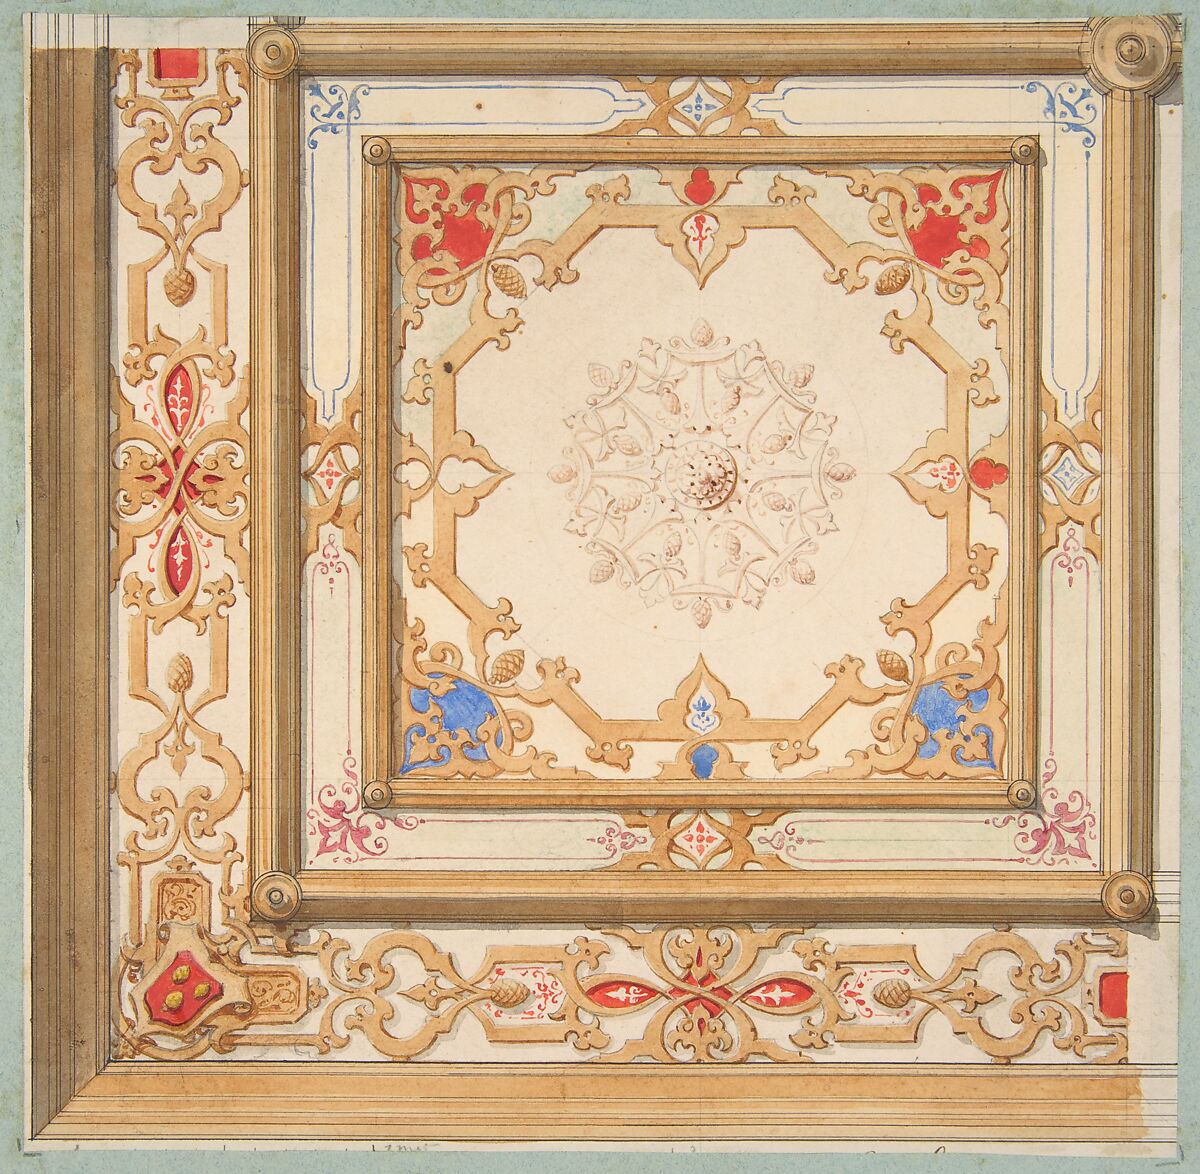 Partial design for a ceiling painted in strapwork and pine cone motifs, Jules-Edmond-Charles Lachaise (French, died 1897), graphite, pen and ink, and watercolor on wove paper; inlaid in blue wove paper 